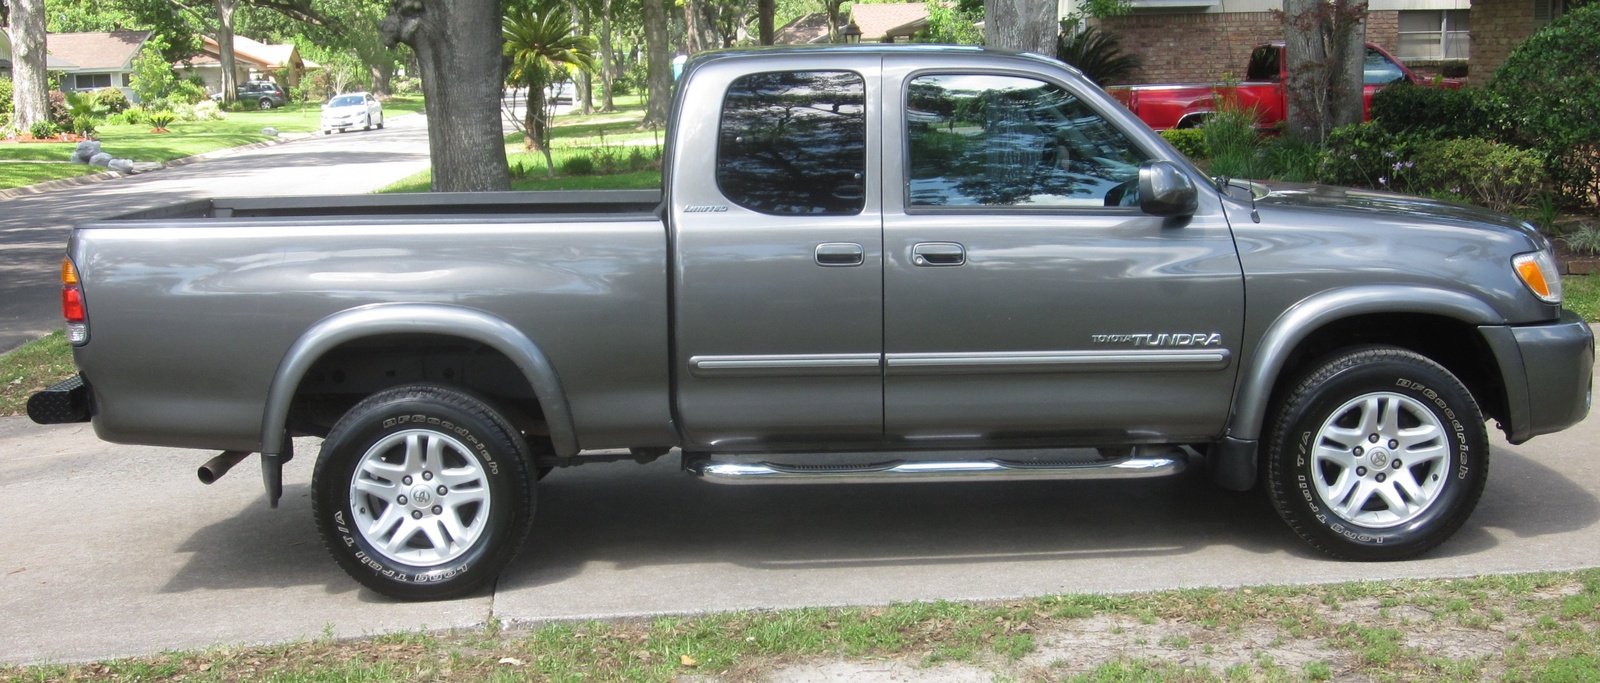 2004 Toyota tundra specs and features